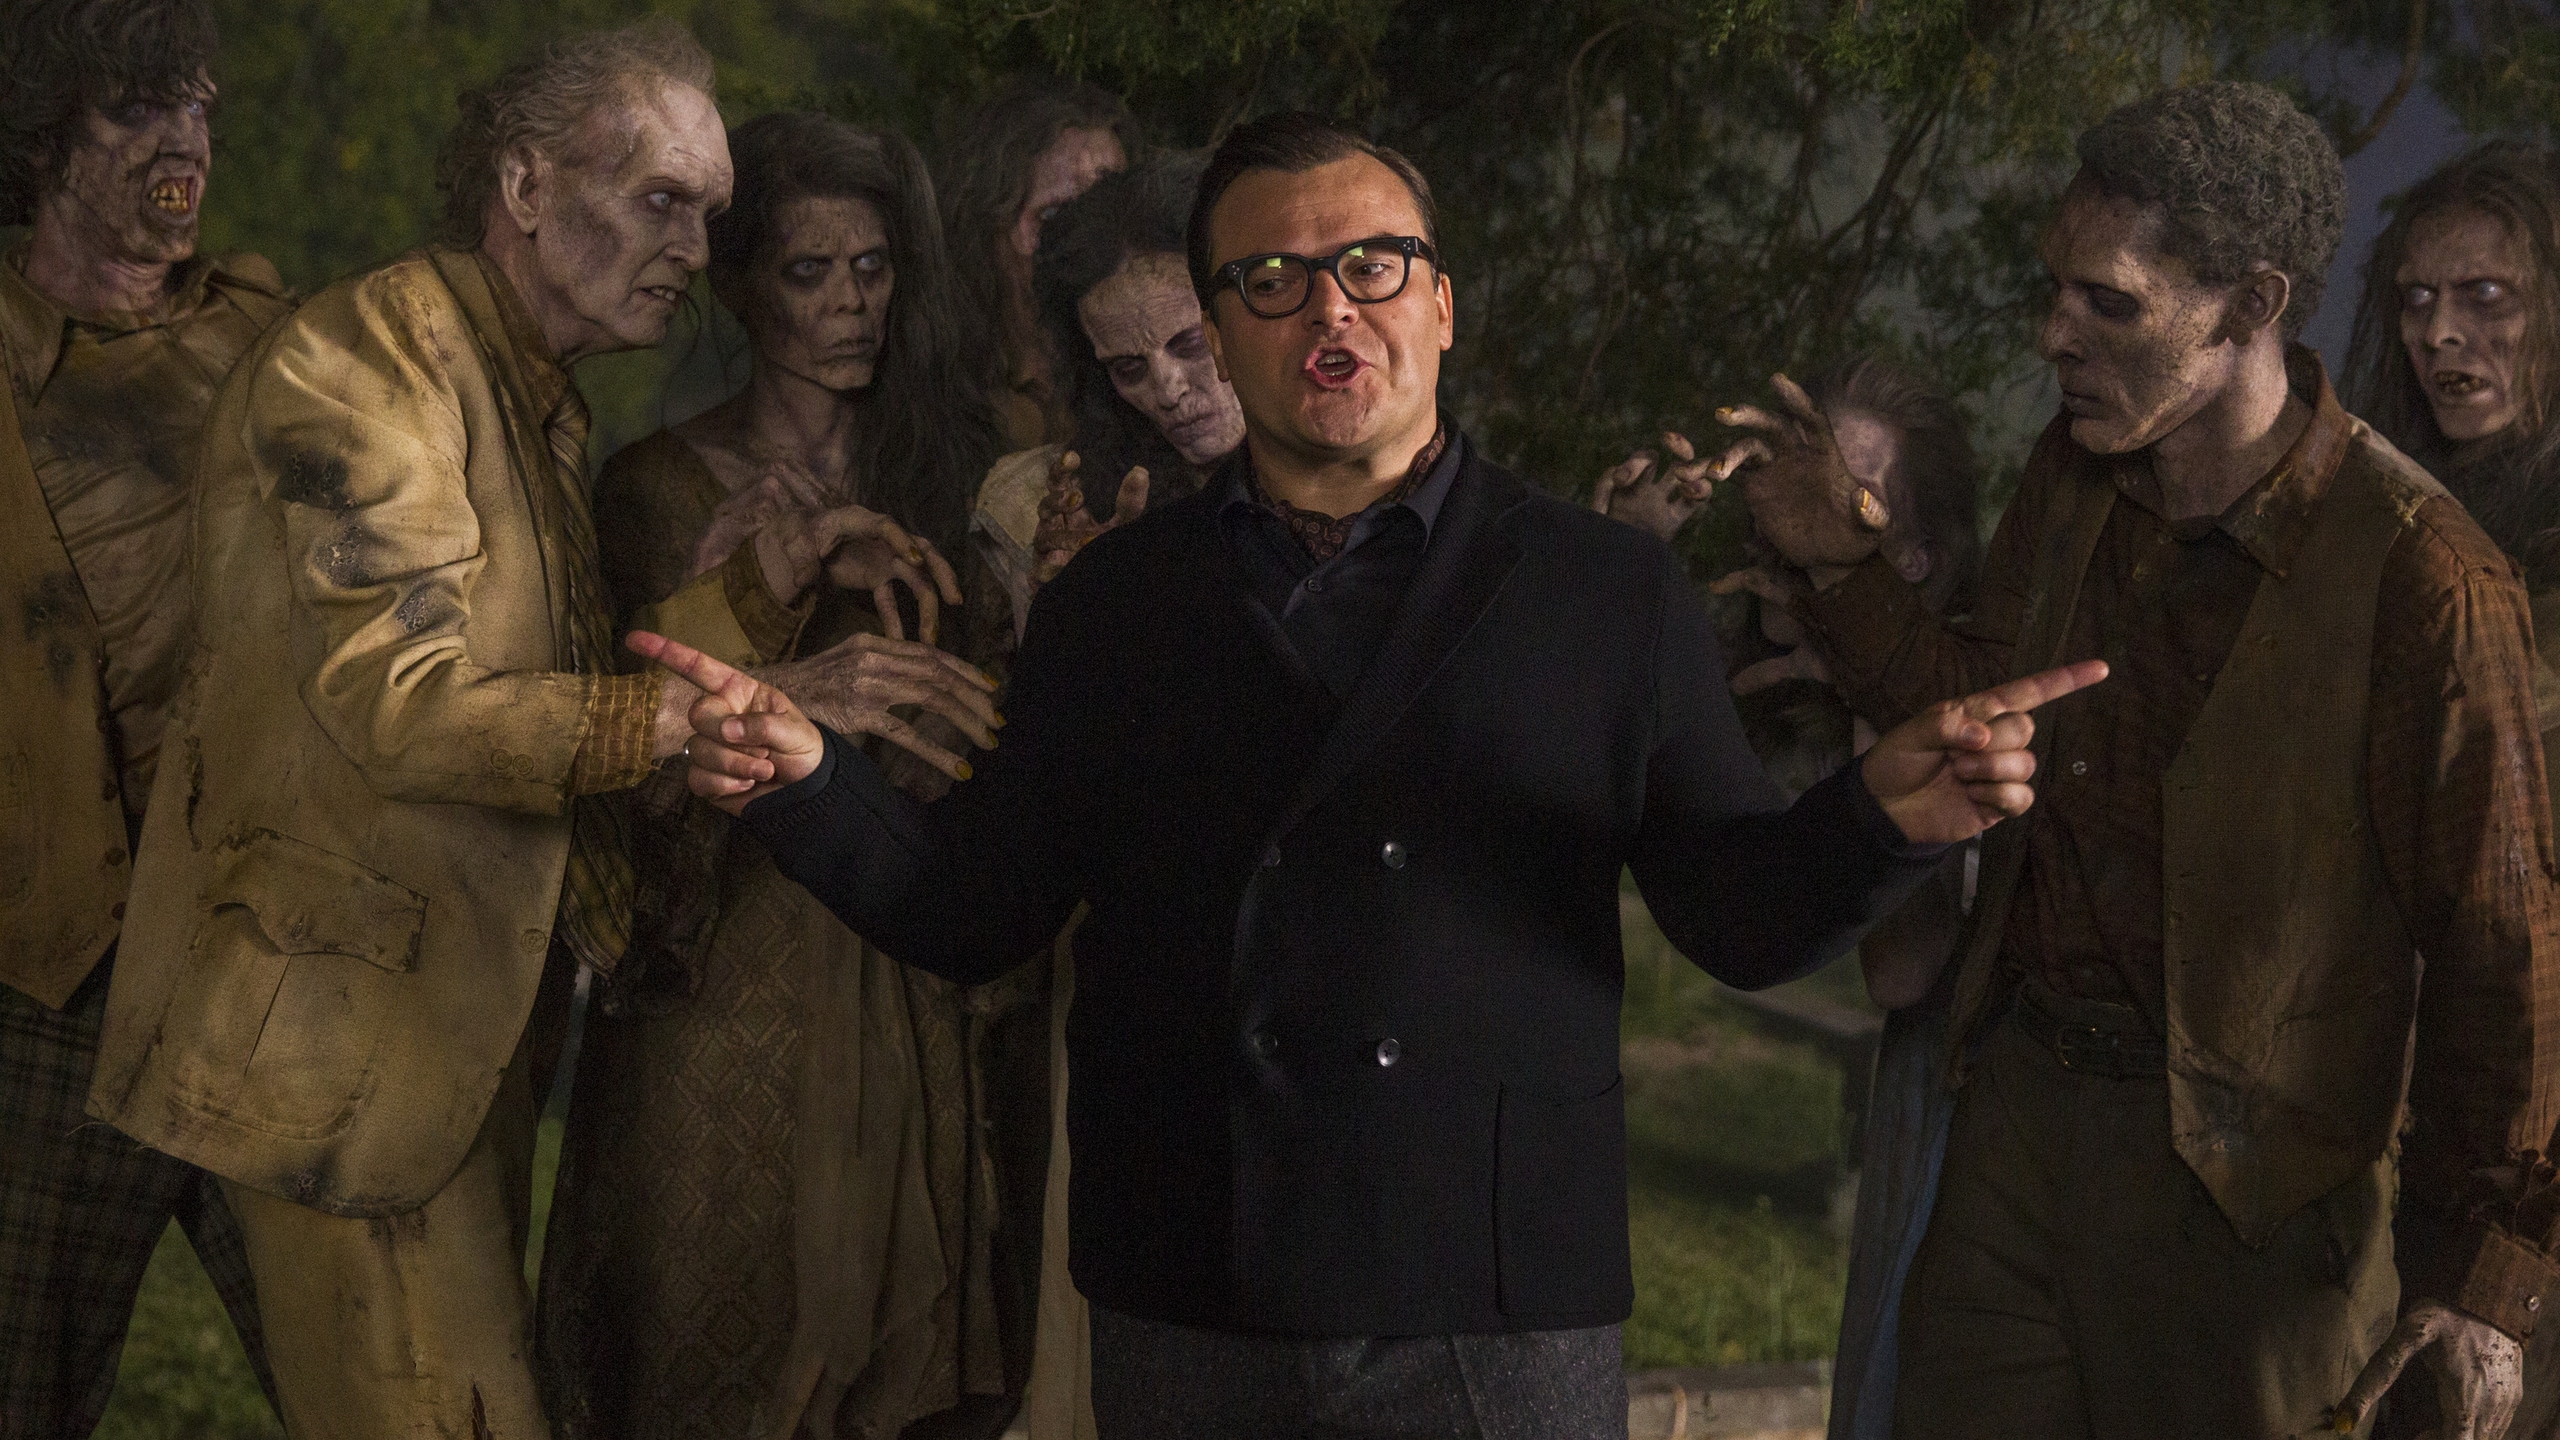 Goosebumps Movie Zombies for 2560x1440 HDTV resolution